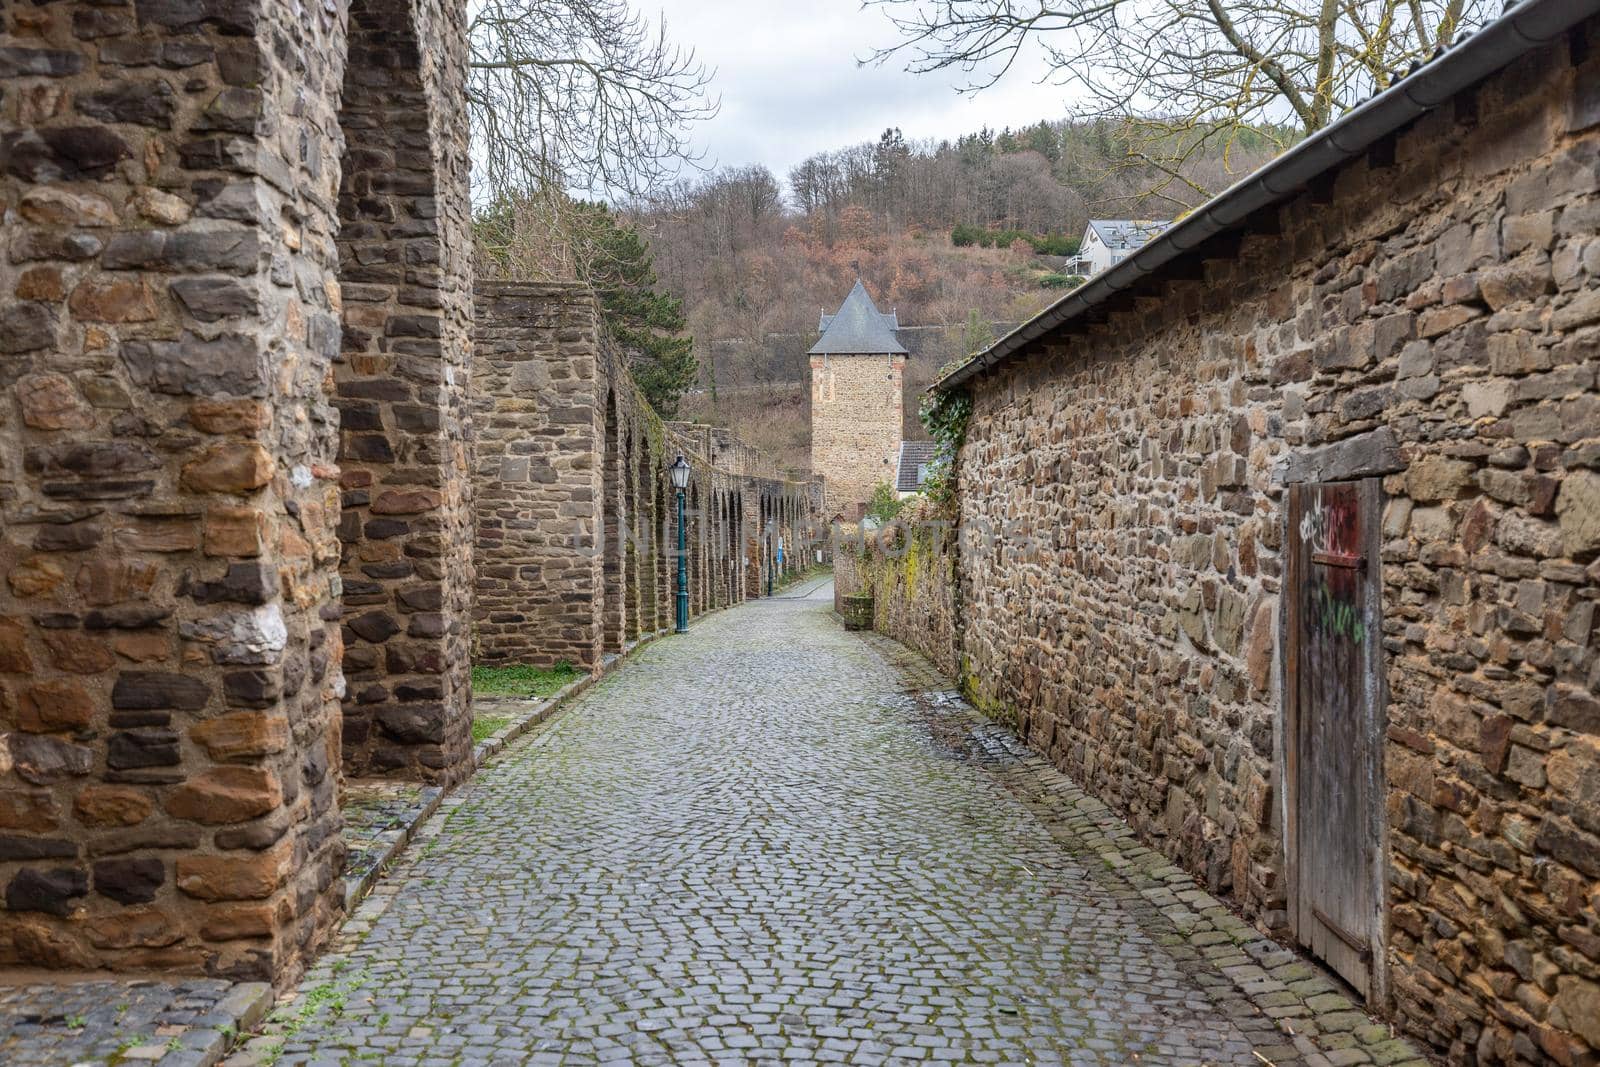 Paved path along the historic city wall of Bad Muenstereifel by reinerc